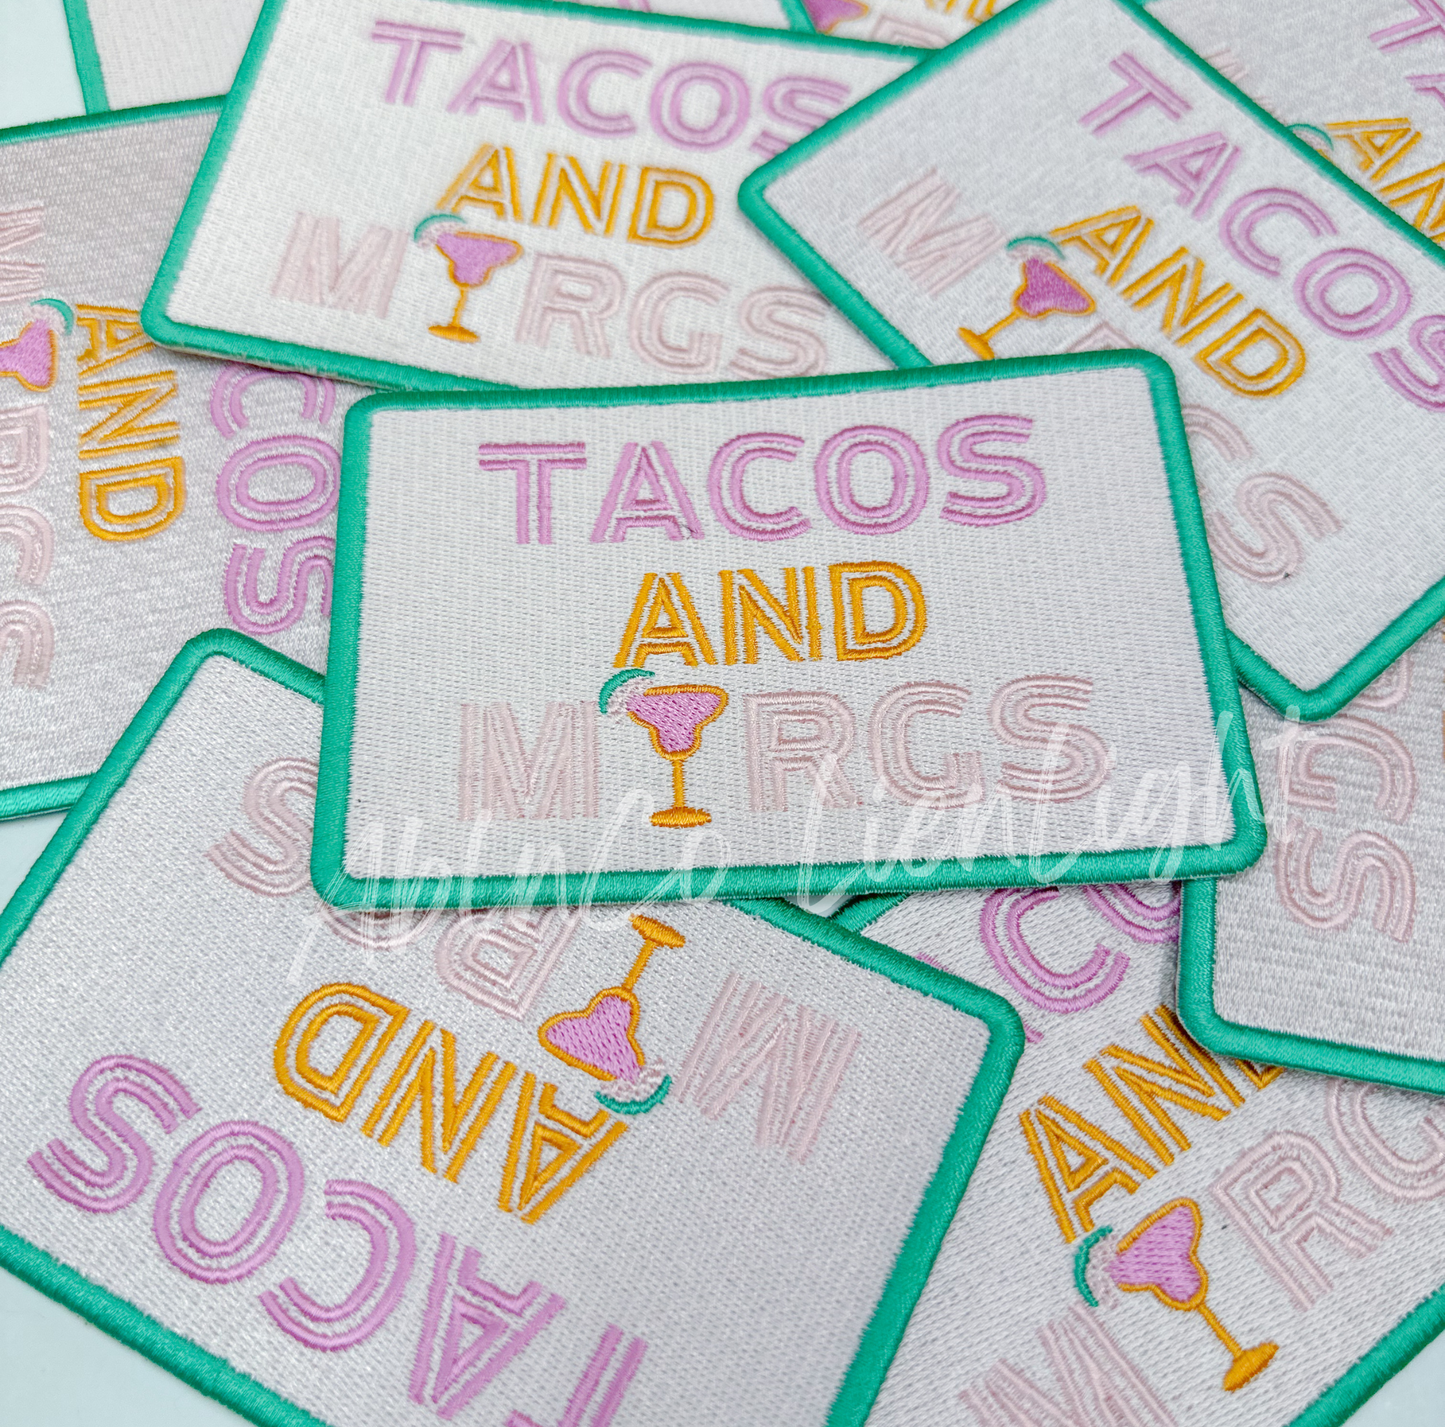 Preppy tacos & margs patch, trucker hat embroidery patch